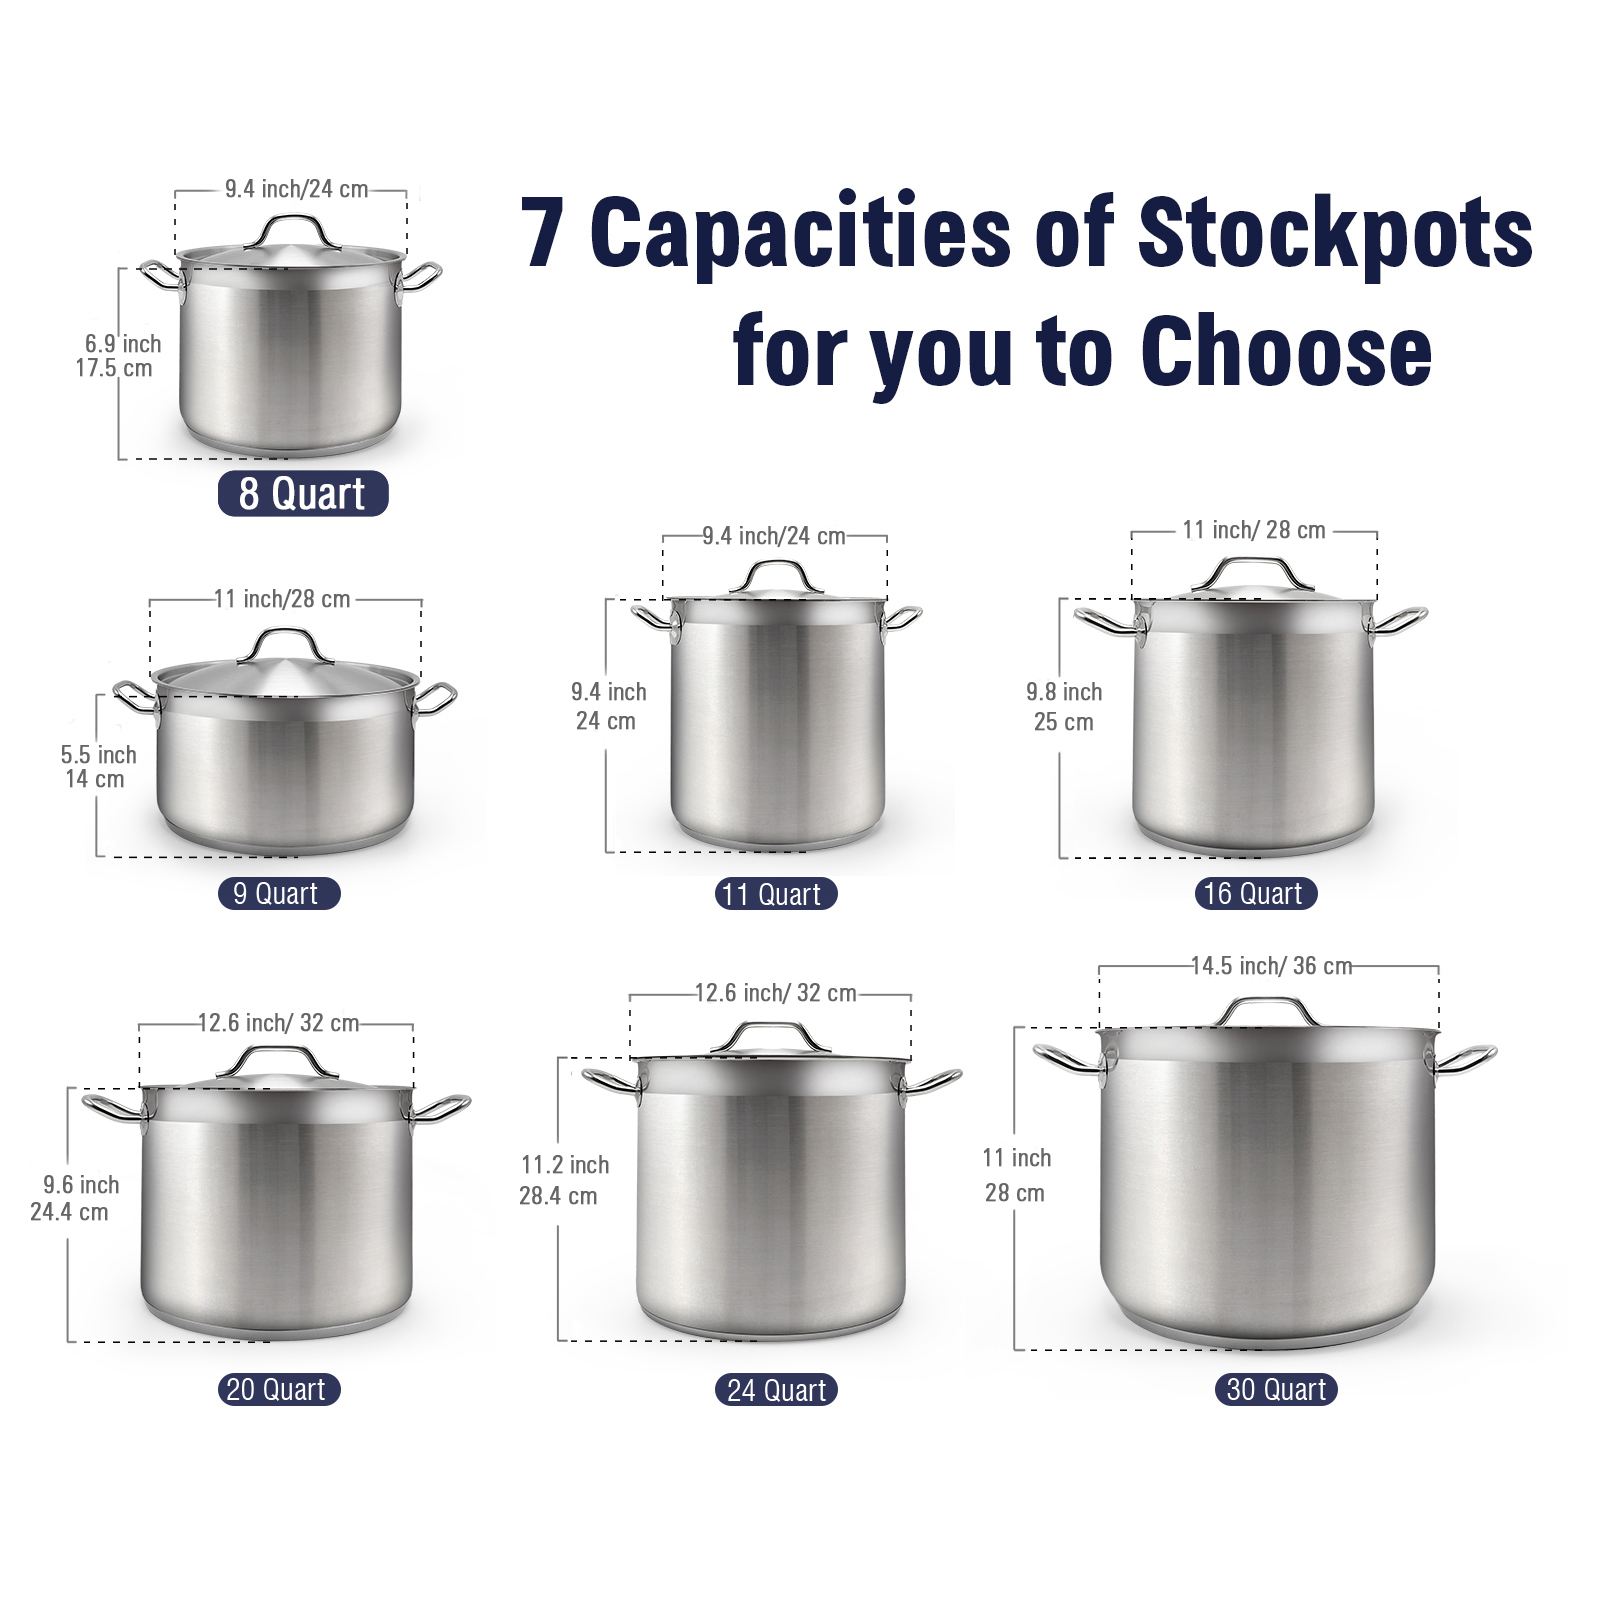 Cooks Standard Stockpots Stainless Steel, 8 Quart Professional Grade Stock Pot with Lid, Silver - image 3 of 8